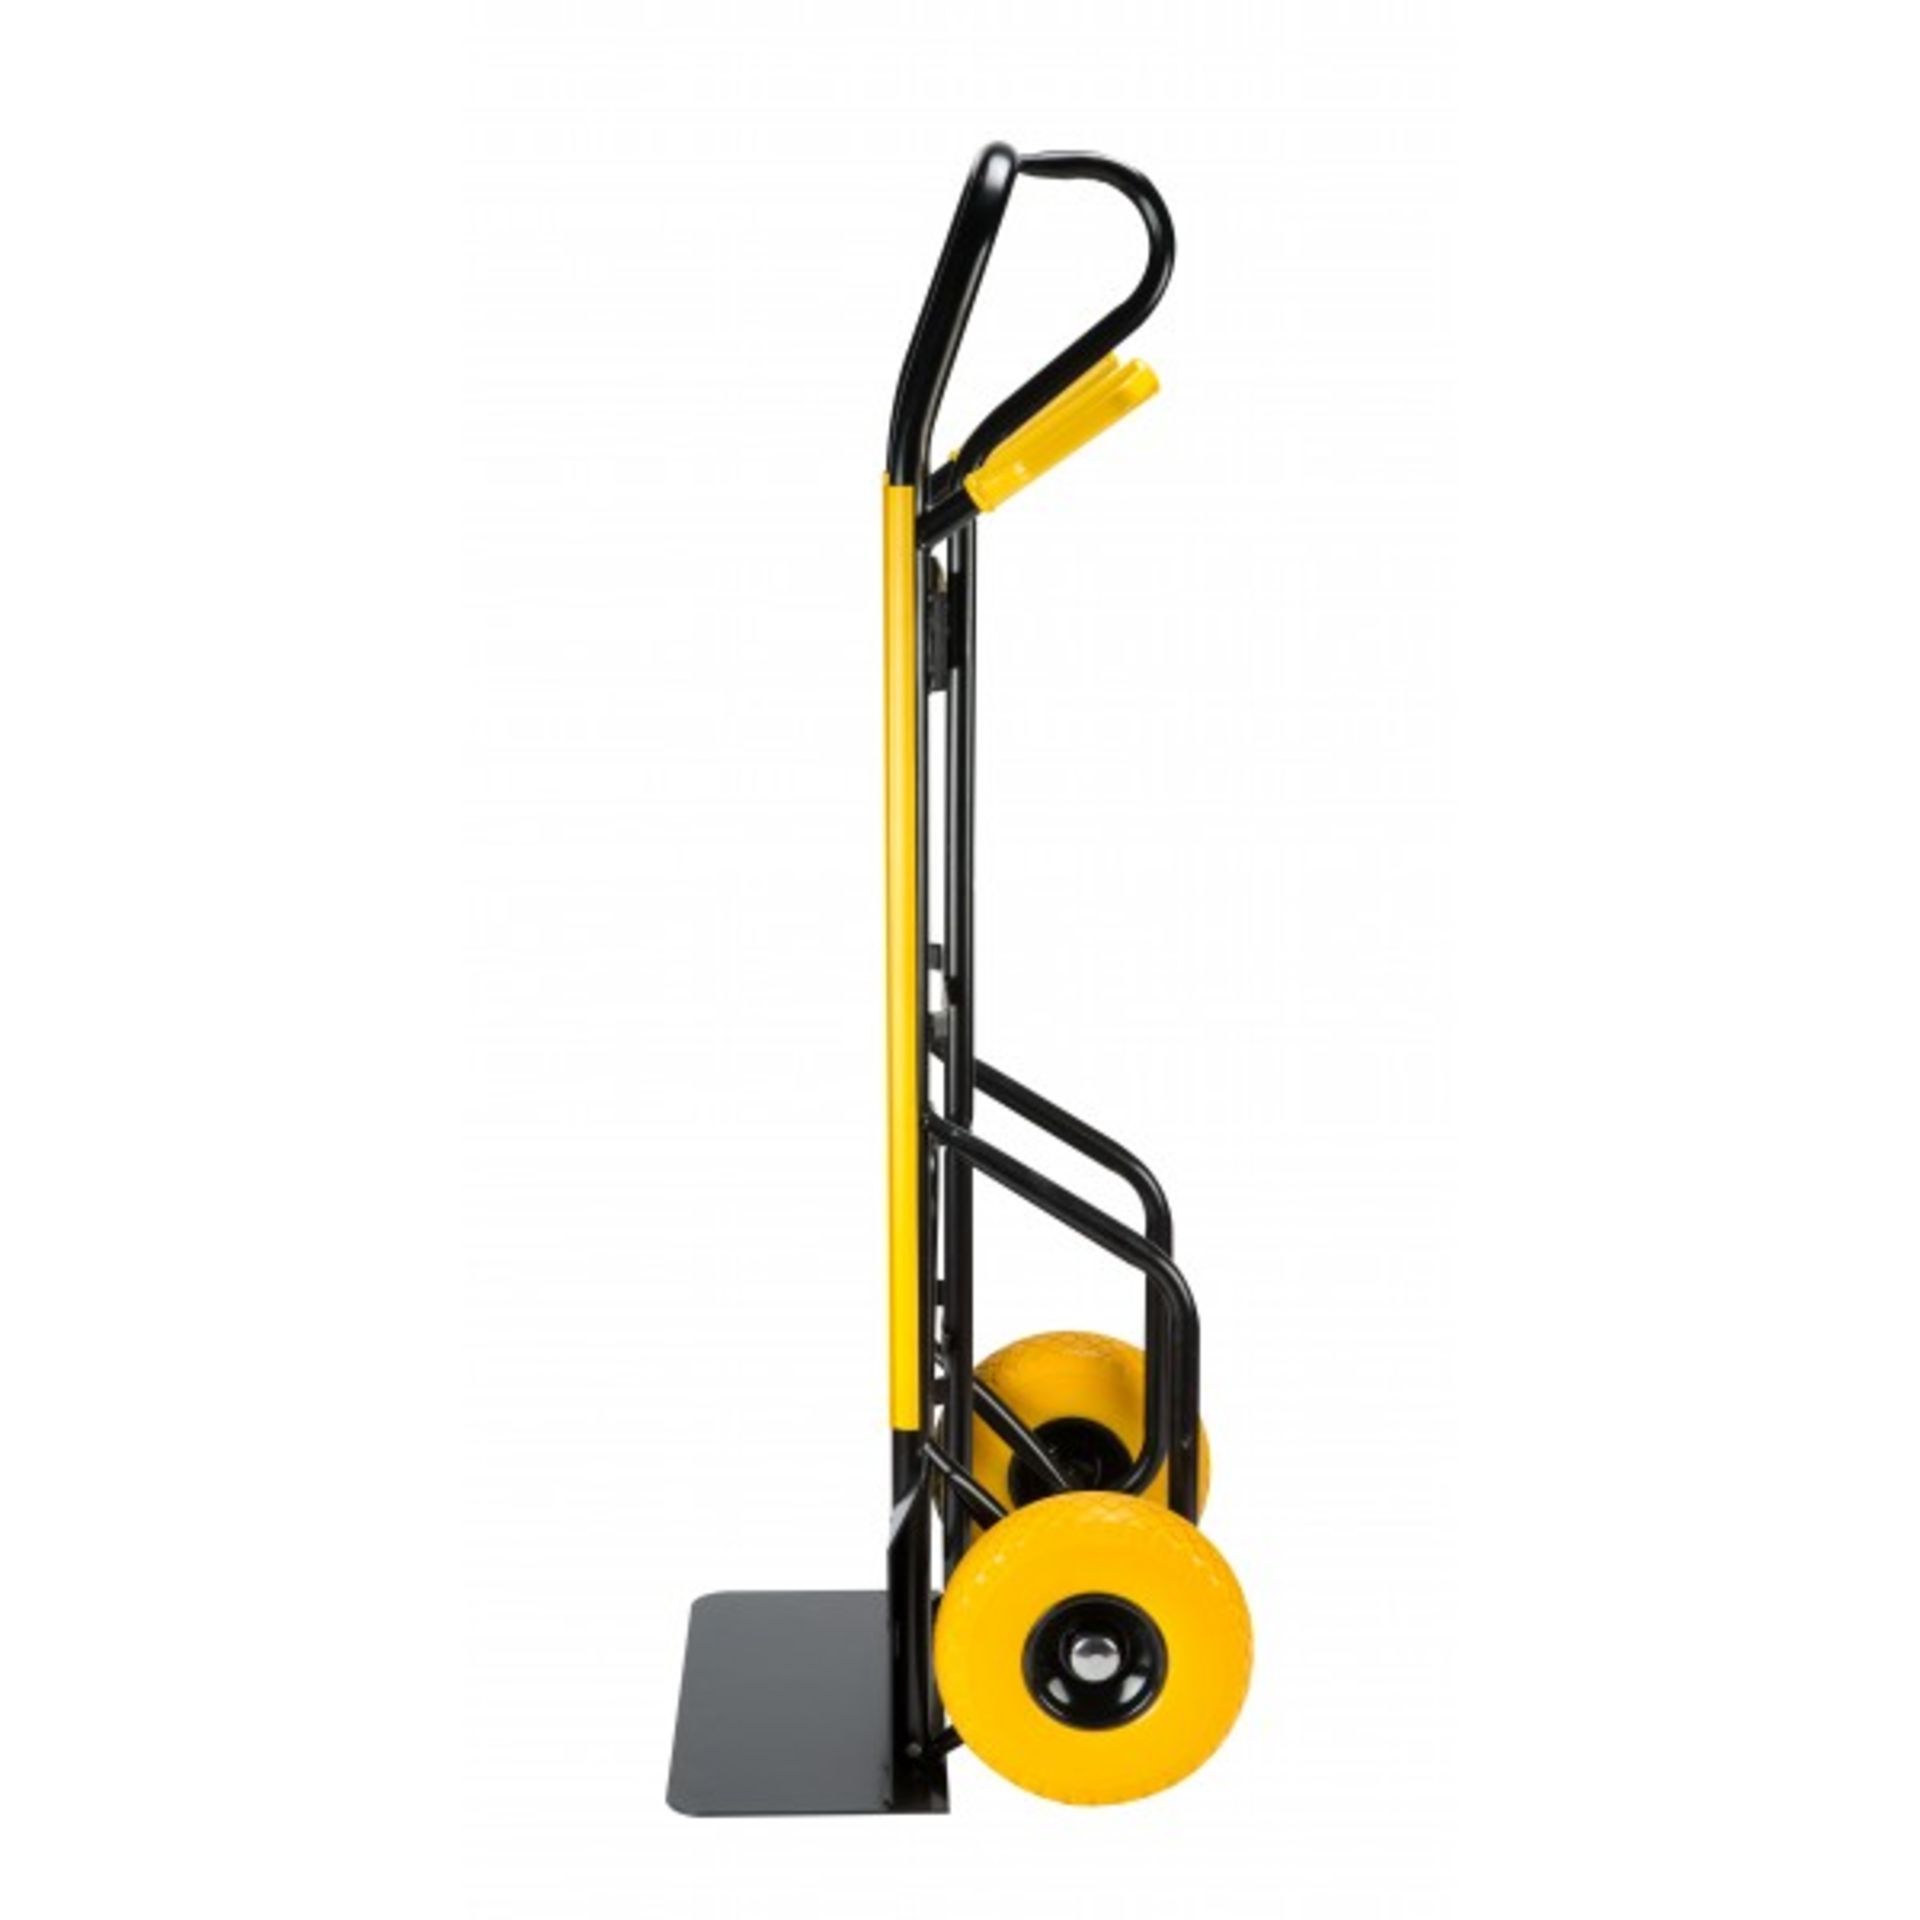 Brand New 250kg STANLEY FATMAX All-round Hand Truck, All-in-one design: P-Handle let’s truck lay - Image 3 of 3